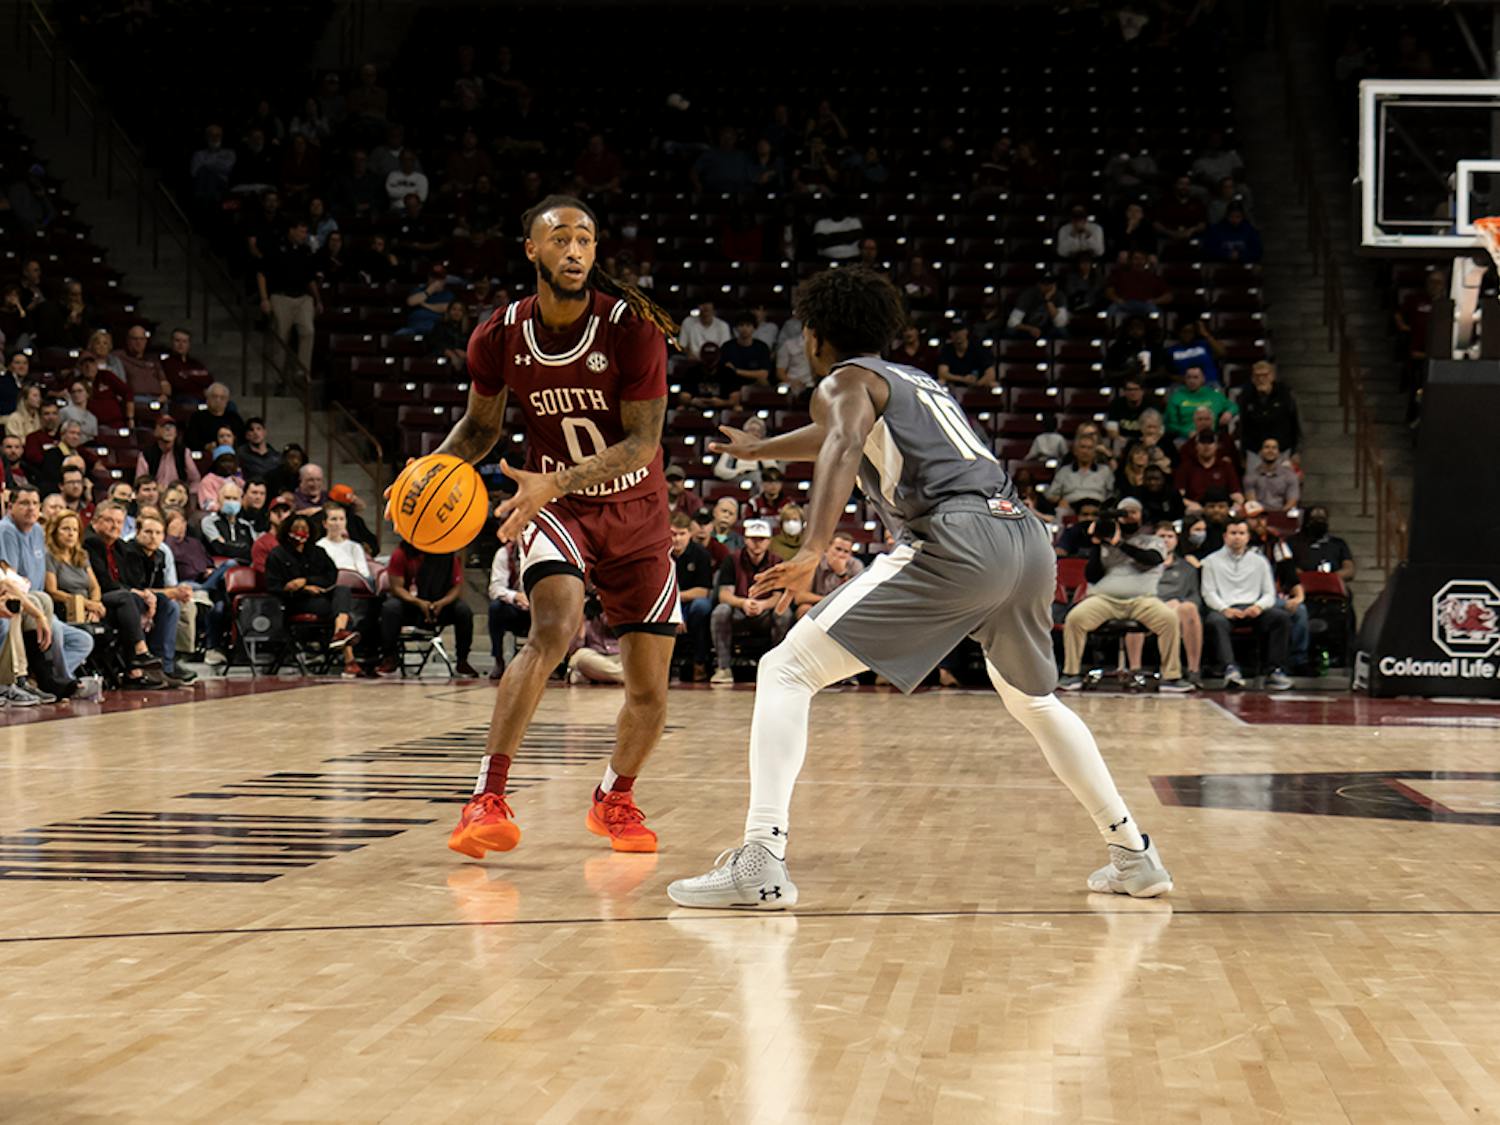 Graduate student guard James Reese looks for an open teammate to pass the ball to. South Carolina won this game against UAB on Nov. 18, 2021 by a score of 66-63.